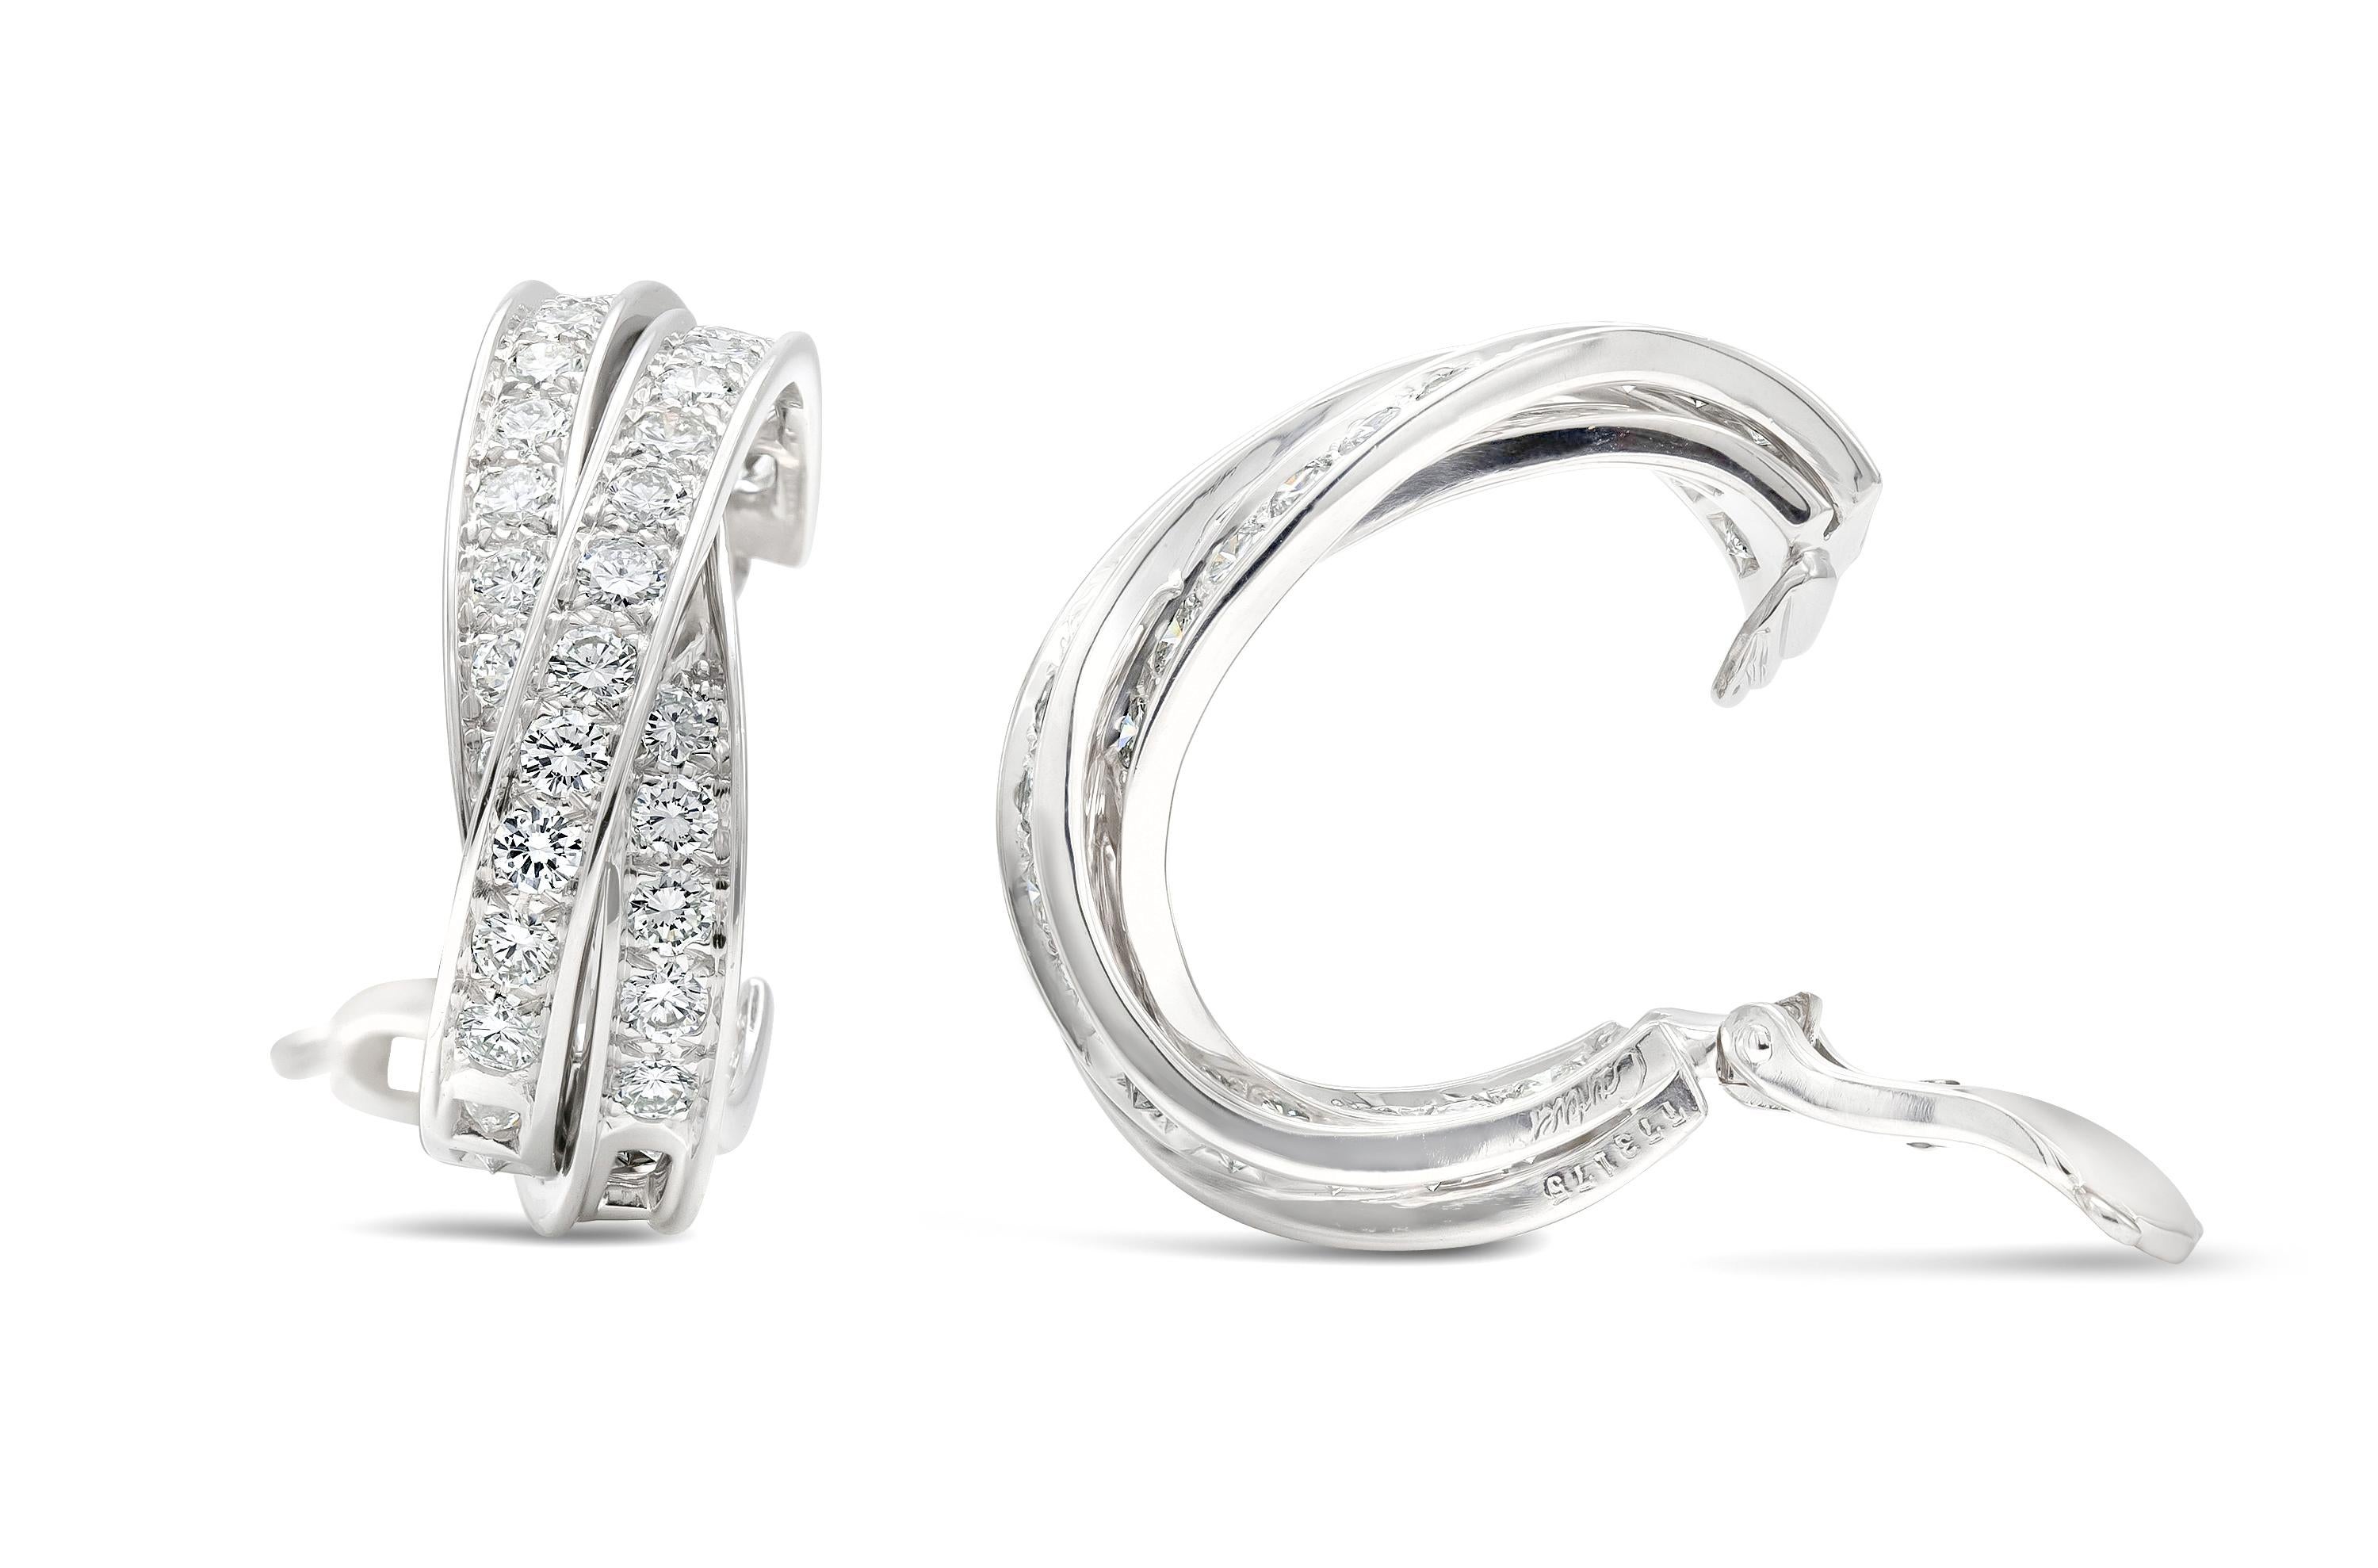 Finely crafted in 18k white gold with round brilliant cut diamonds weighing approximately a total of 6.00 carats.
Signed by Cartier, from their Trinity collection.